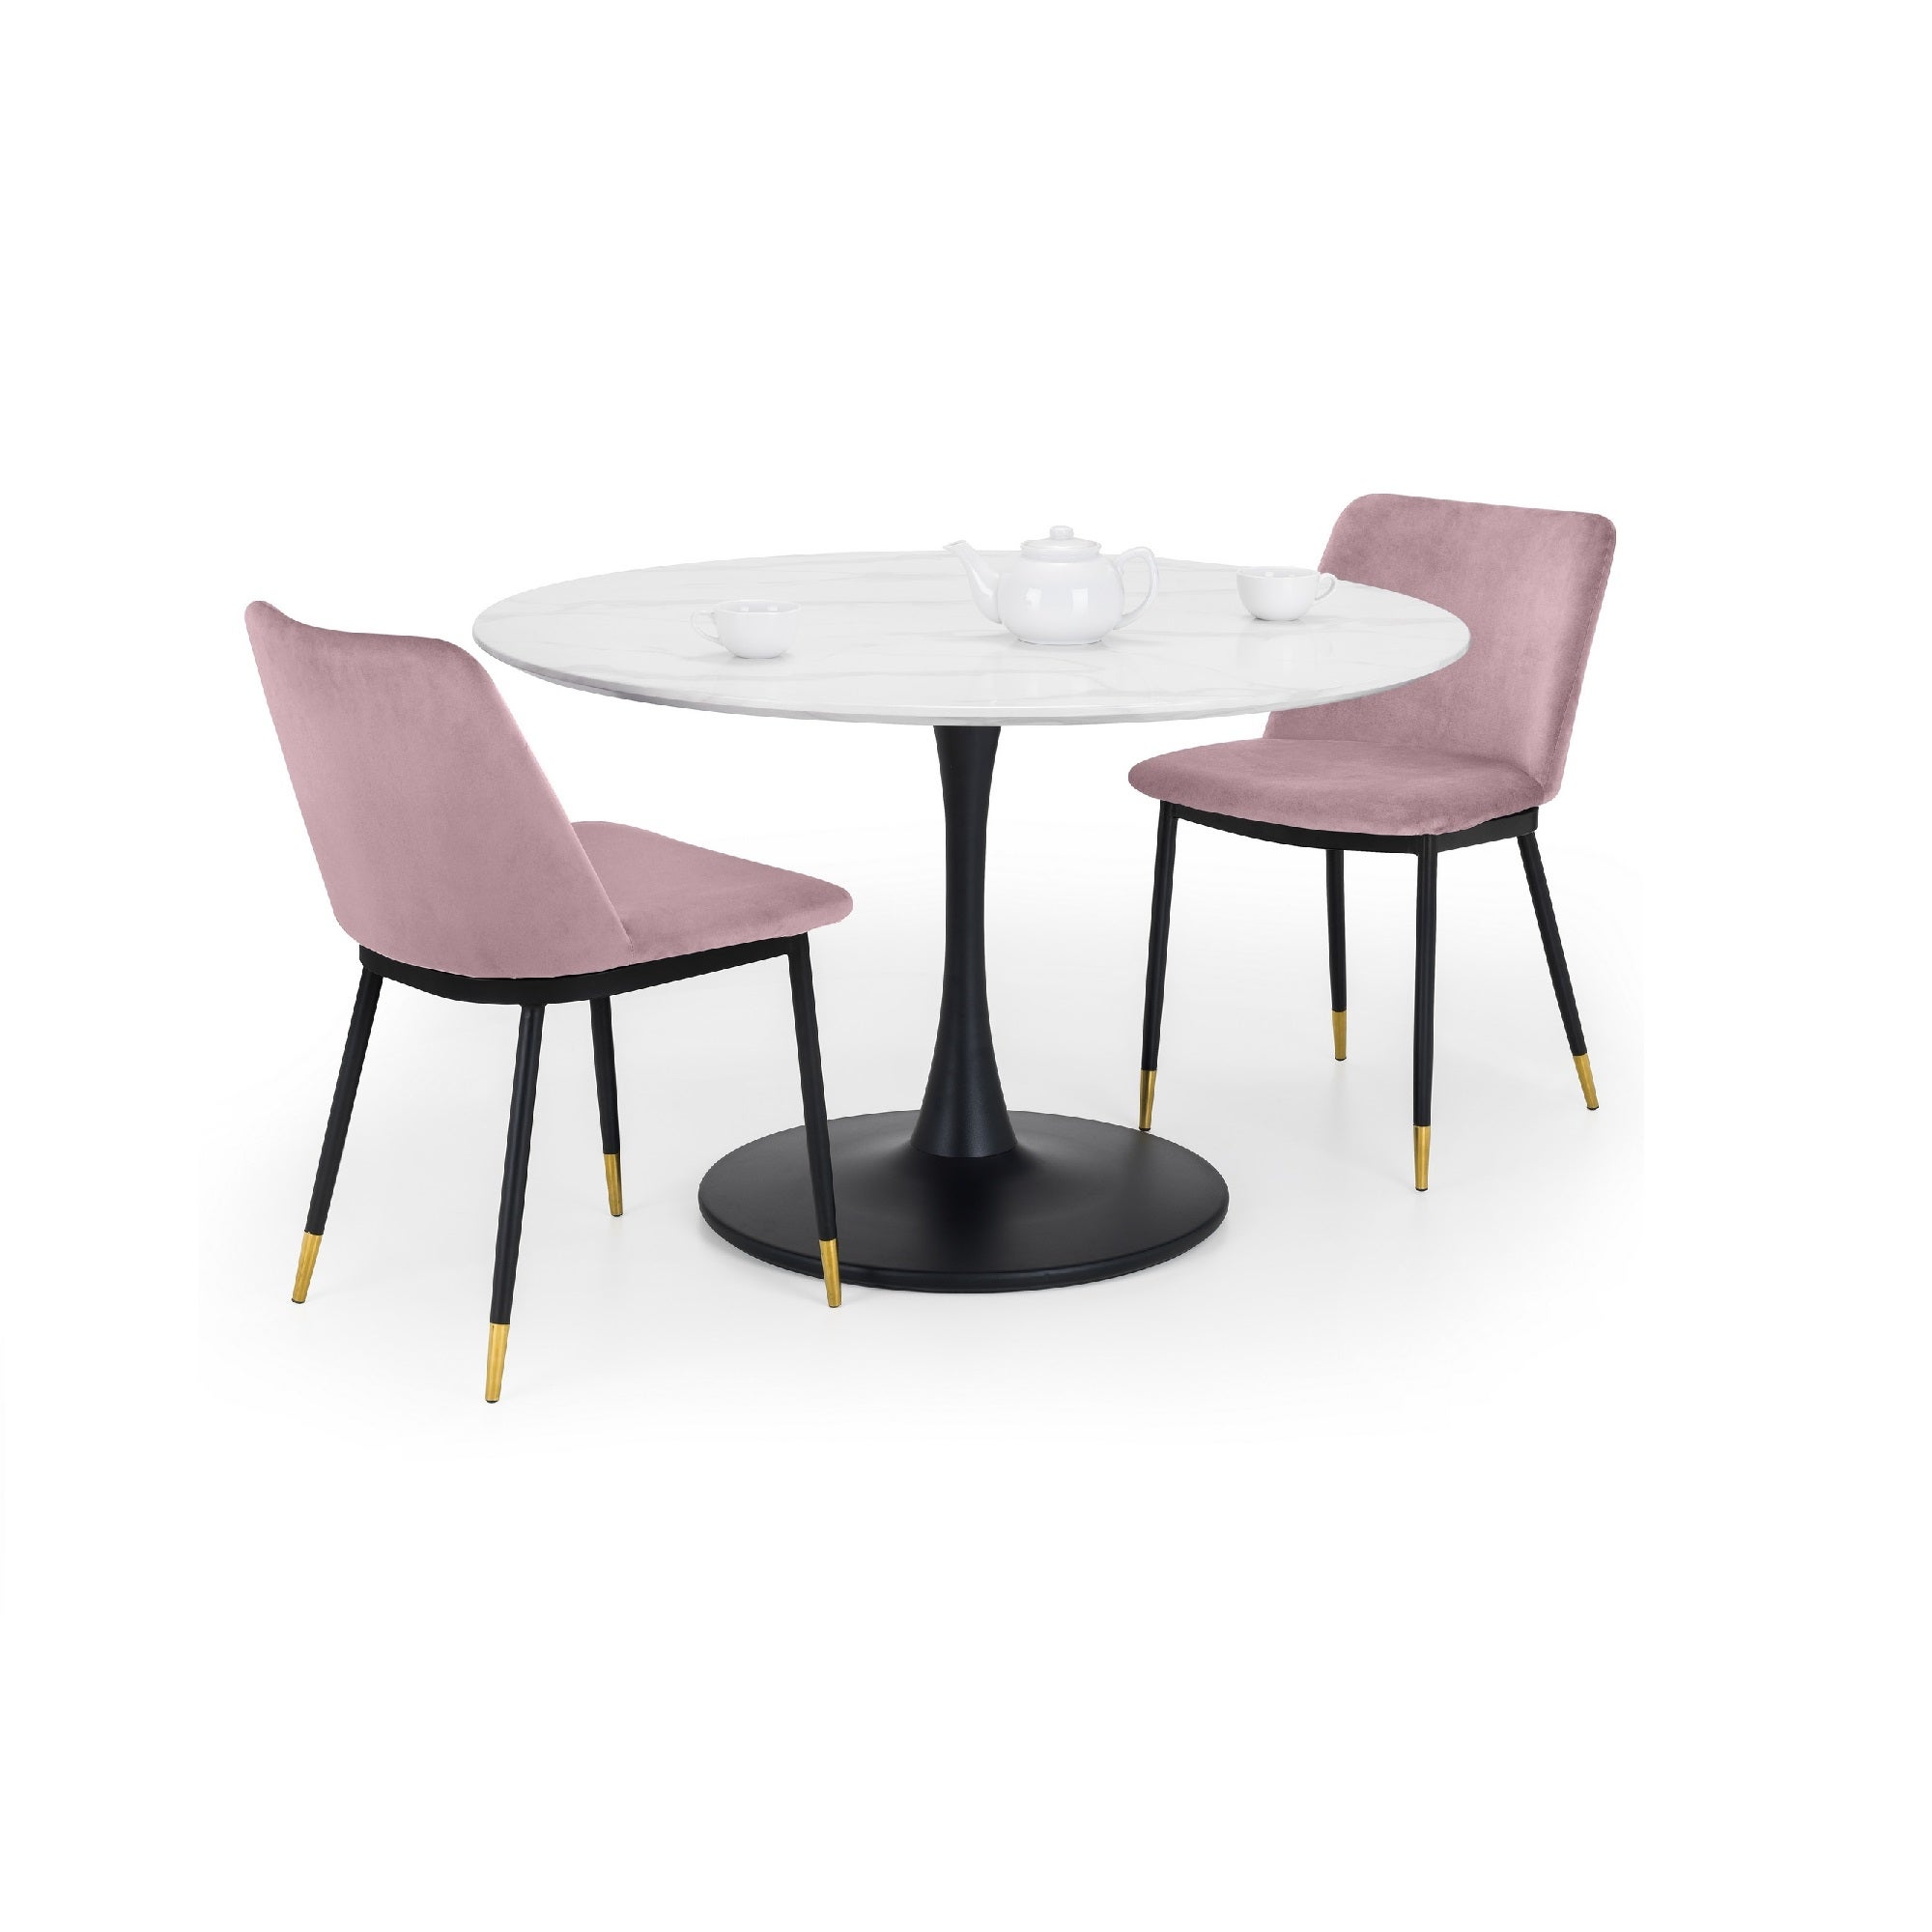 Holland Round Pedestal Dining Table With 2 Delaunay Chairs Pink